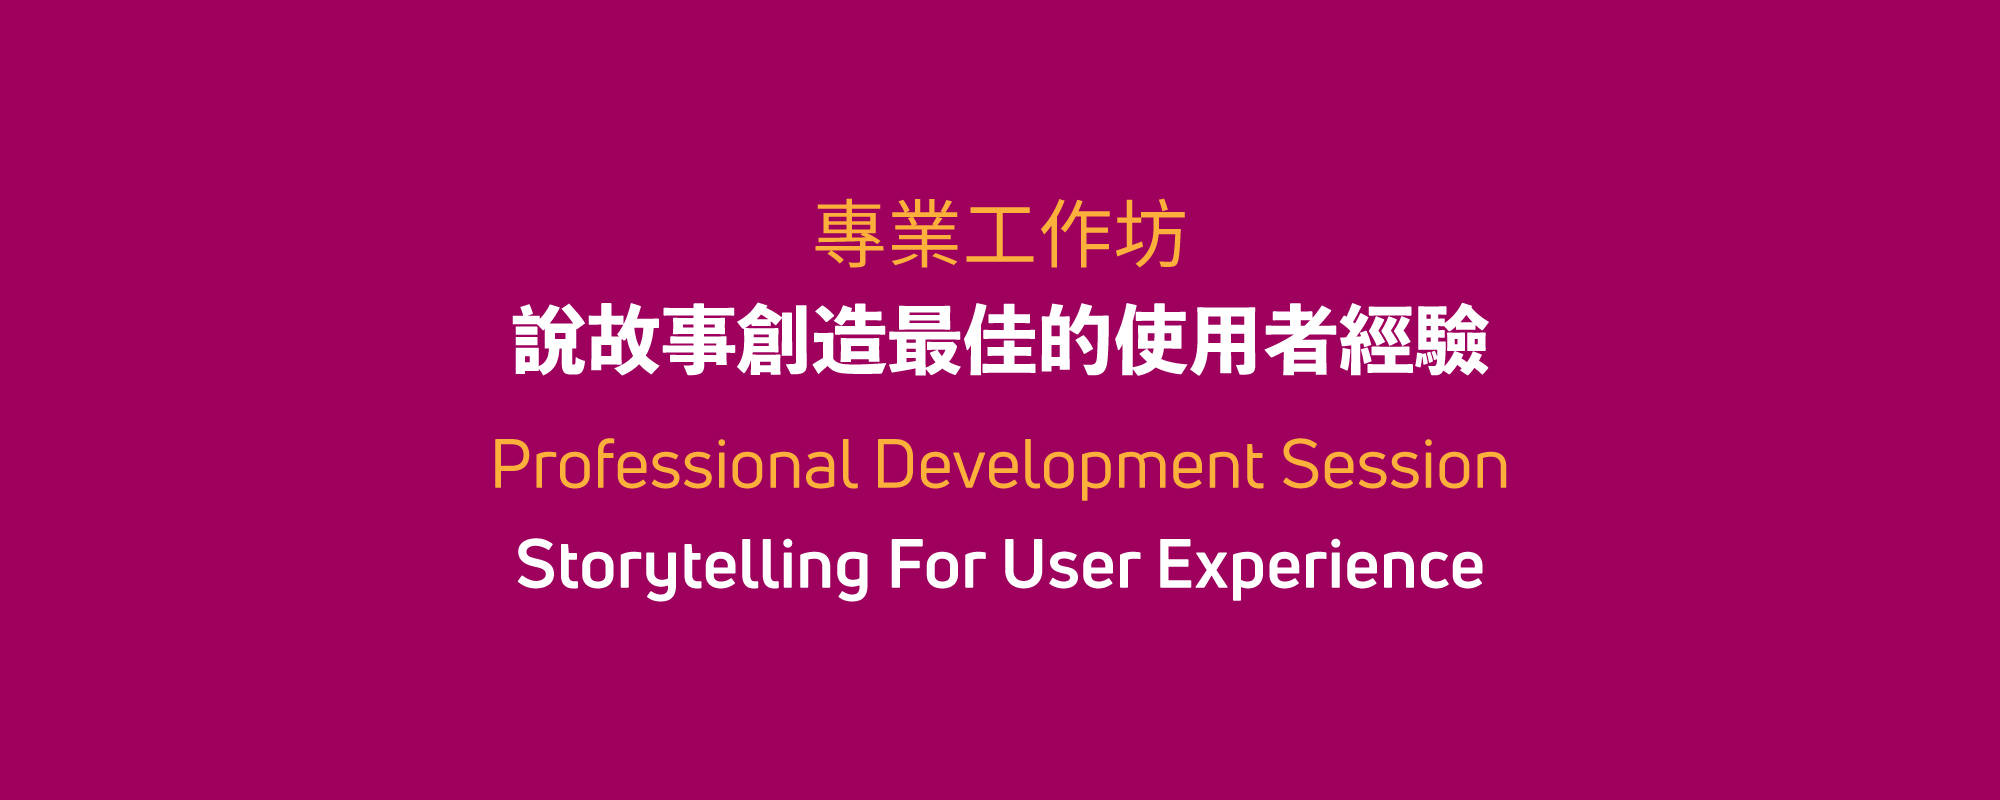 Professional Development Session－ Storytelling for User Experience